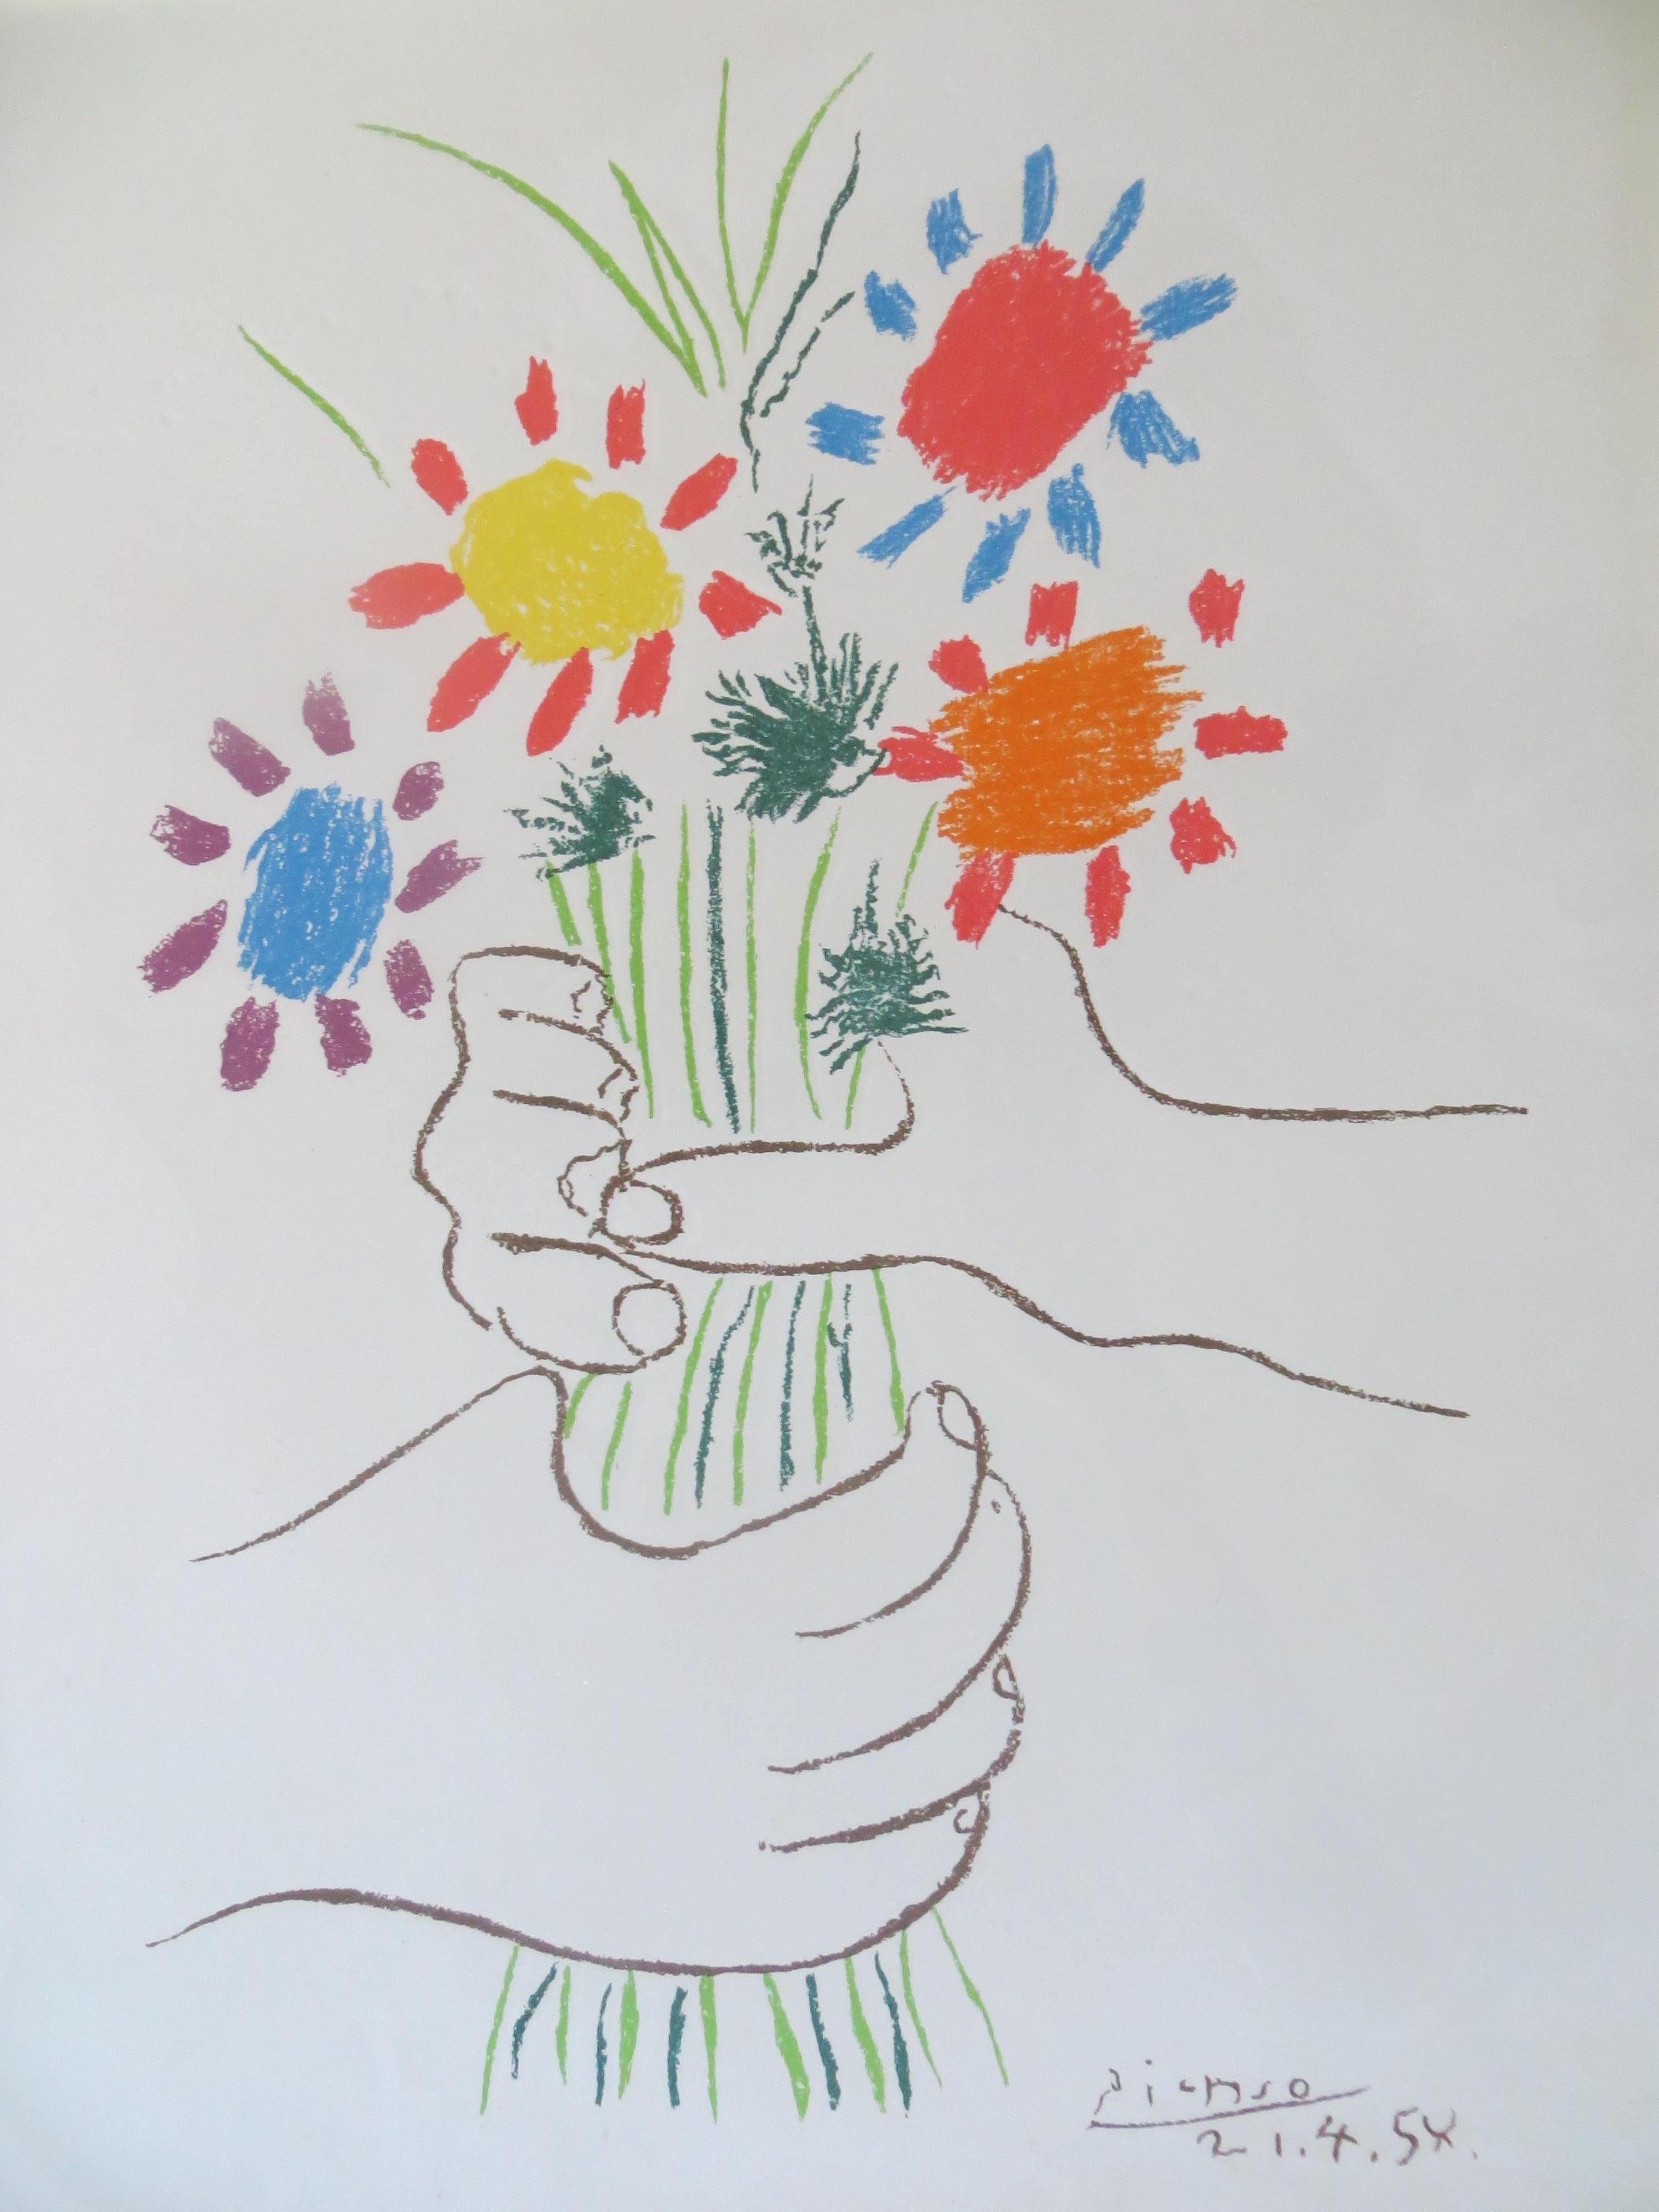 Pablo Picasso Lithograph Hand with Flowers 1958 Arches Paper Framed
Signed and dated in the plate
Color lithograph on Velin D'Arches realized from a drawing
